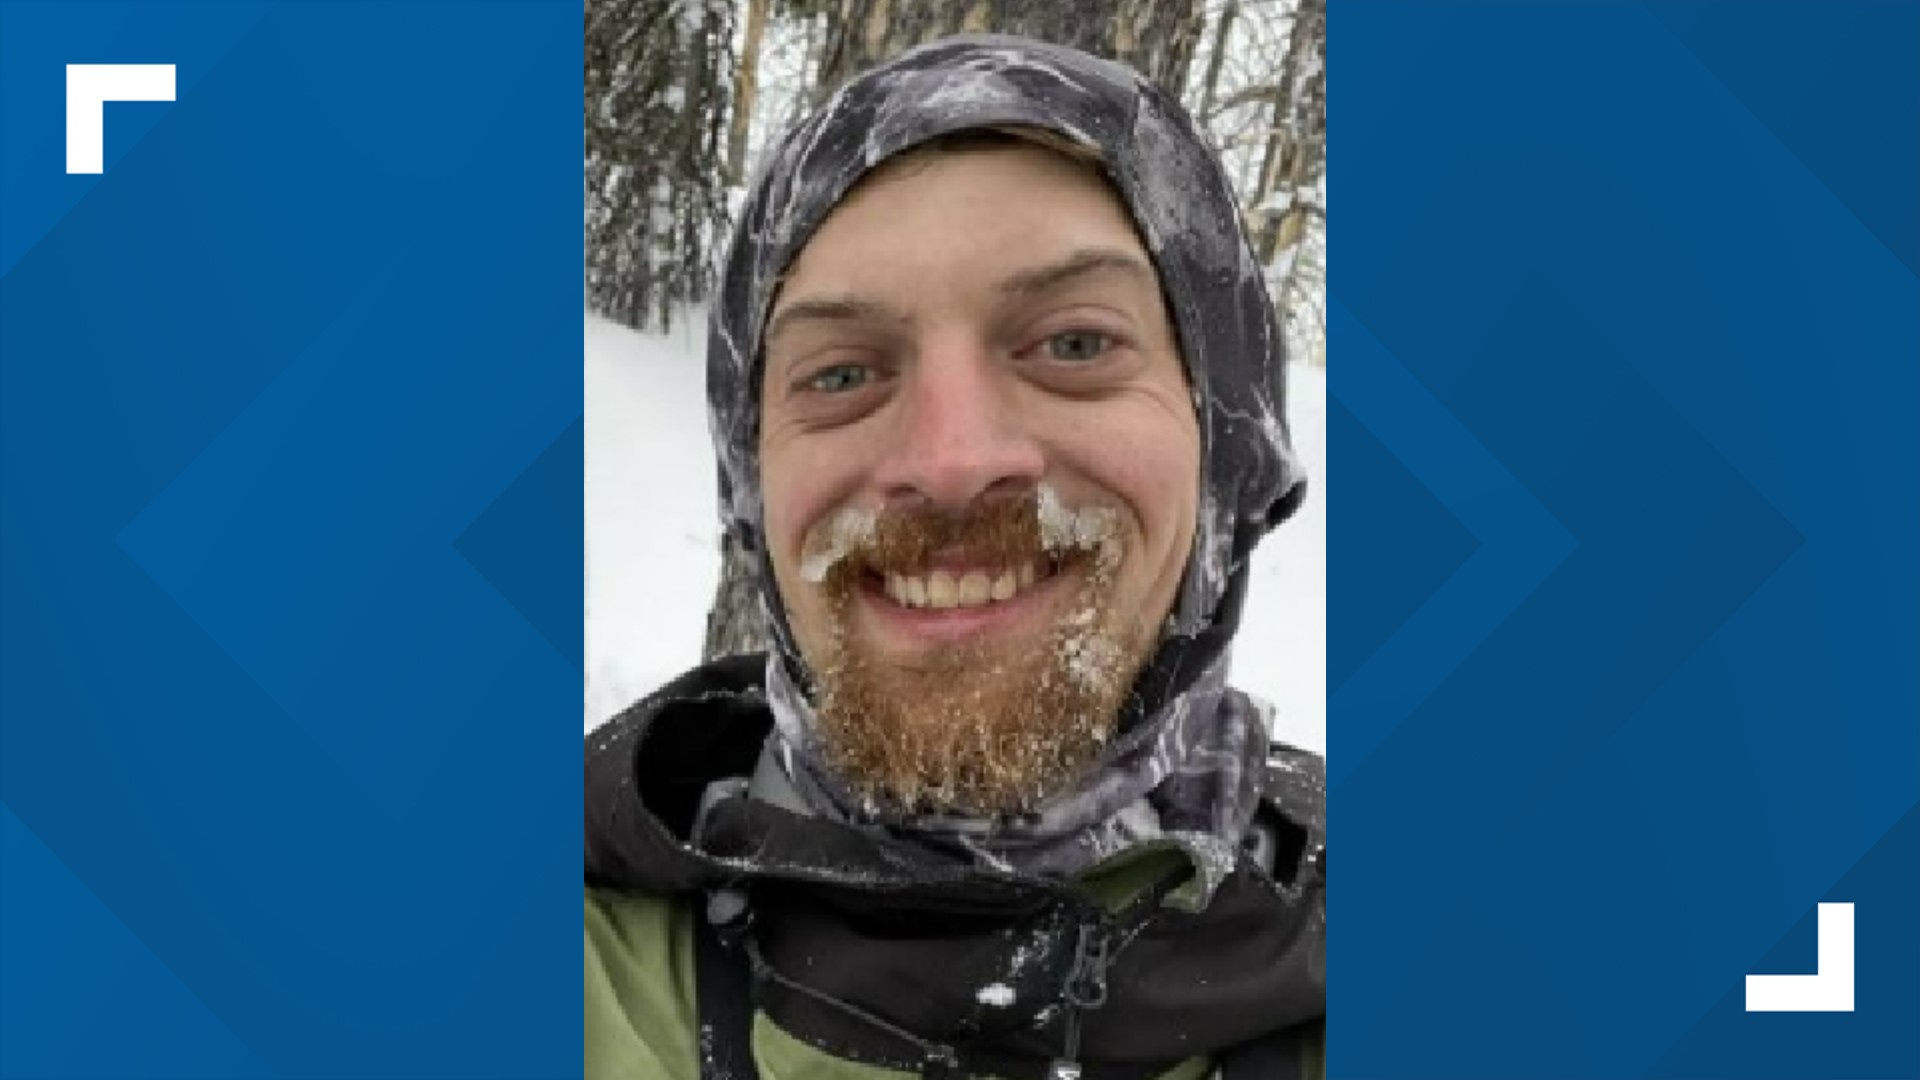 30-year-old Tyler Beyer went missing during a snowmobile trip in March. On Friday, his body was recovered.